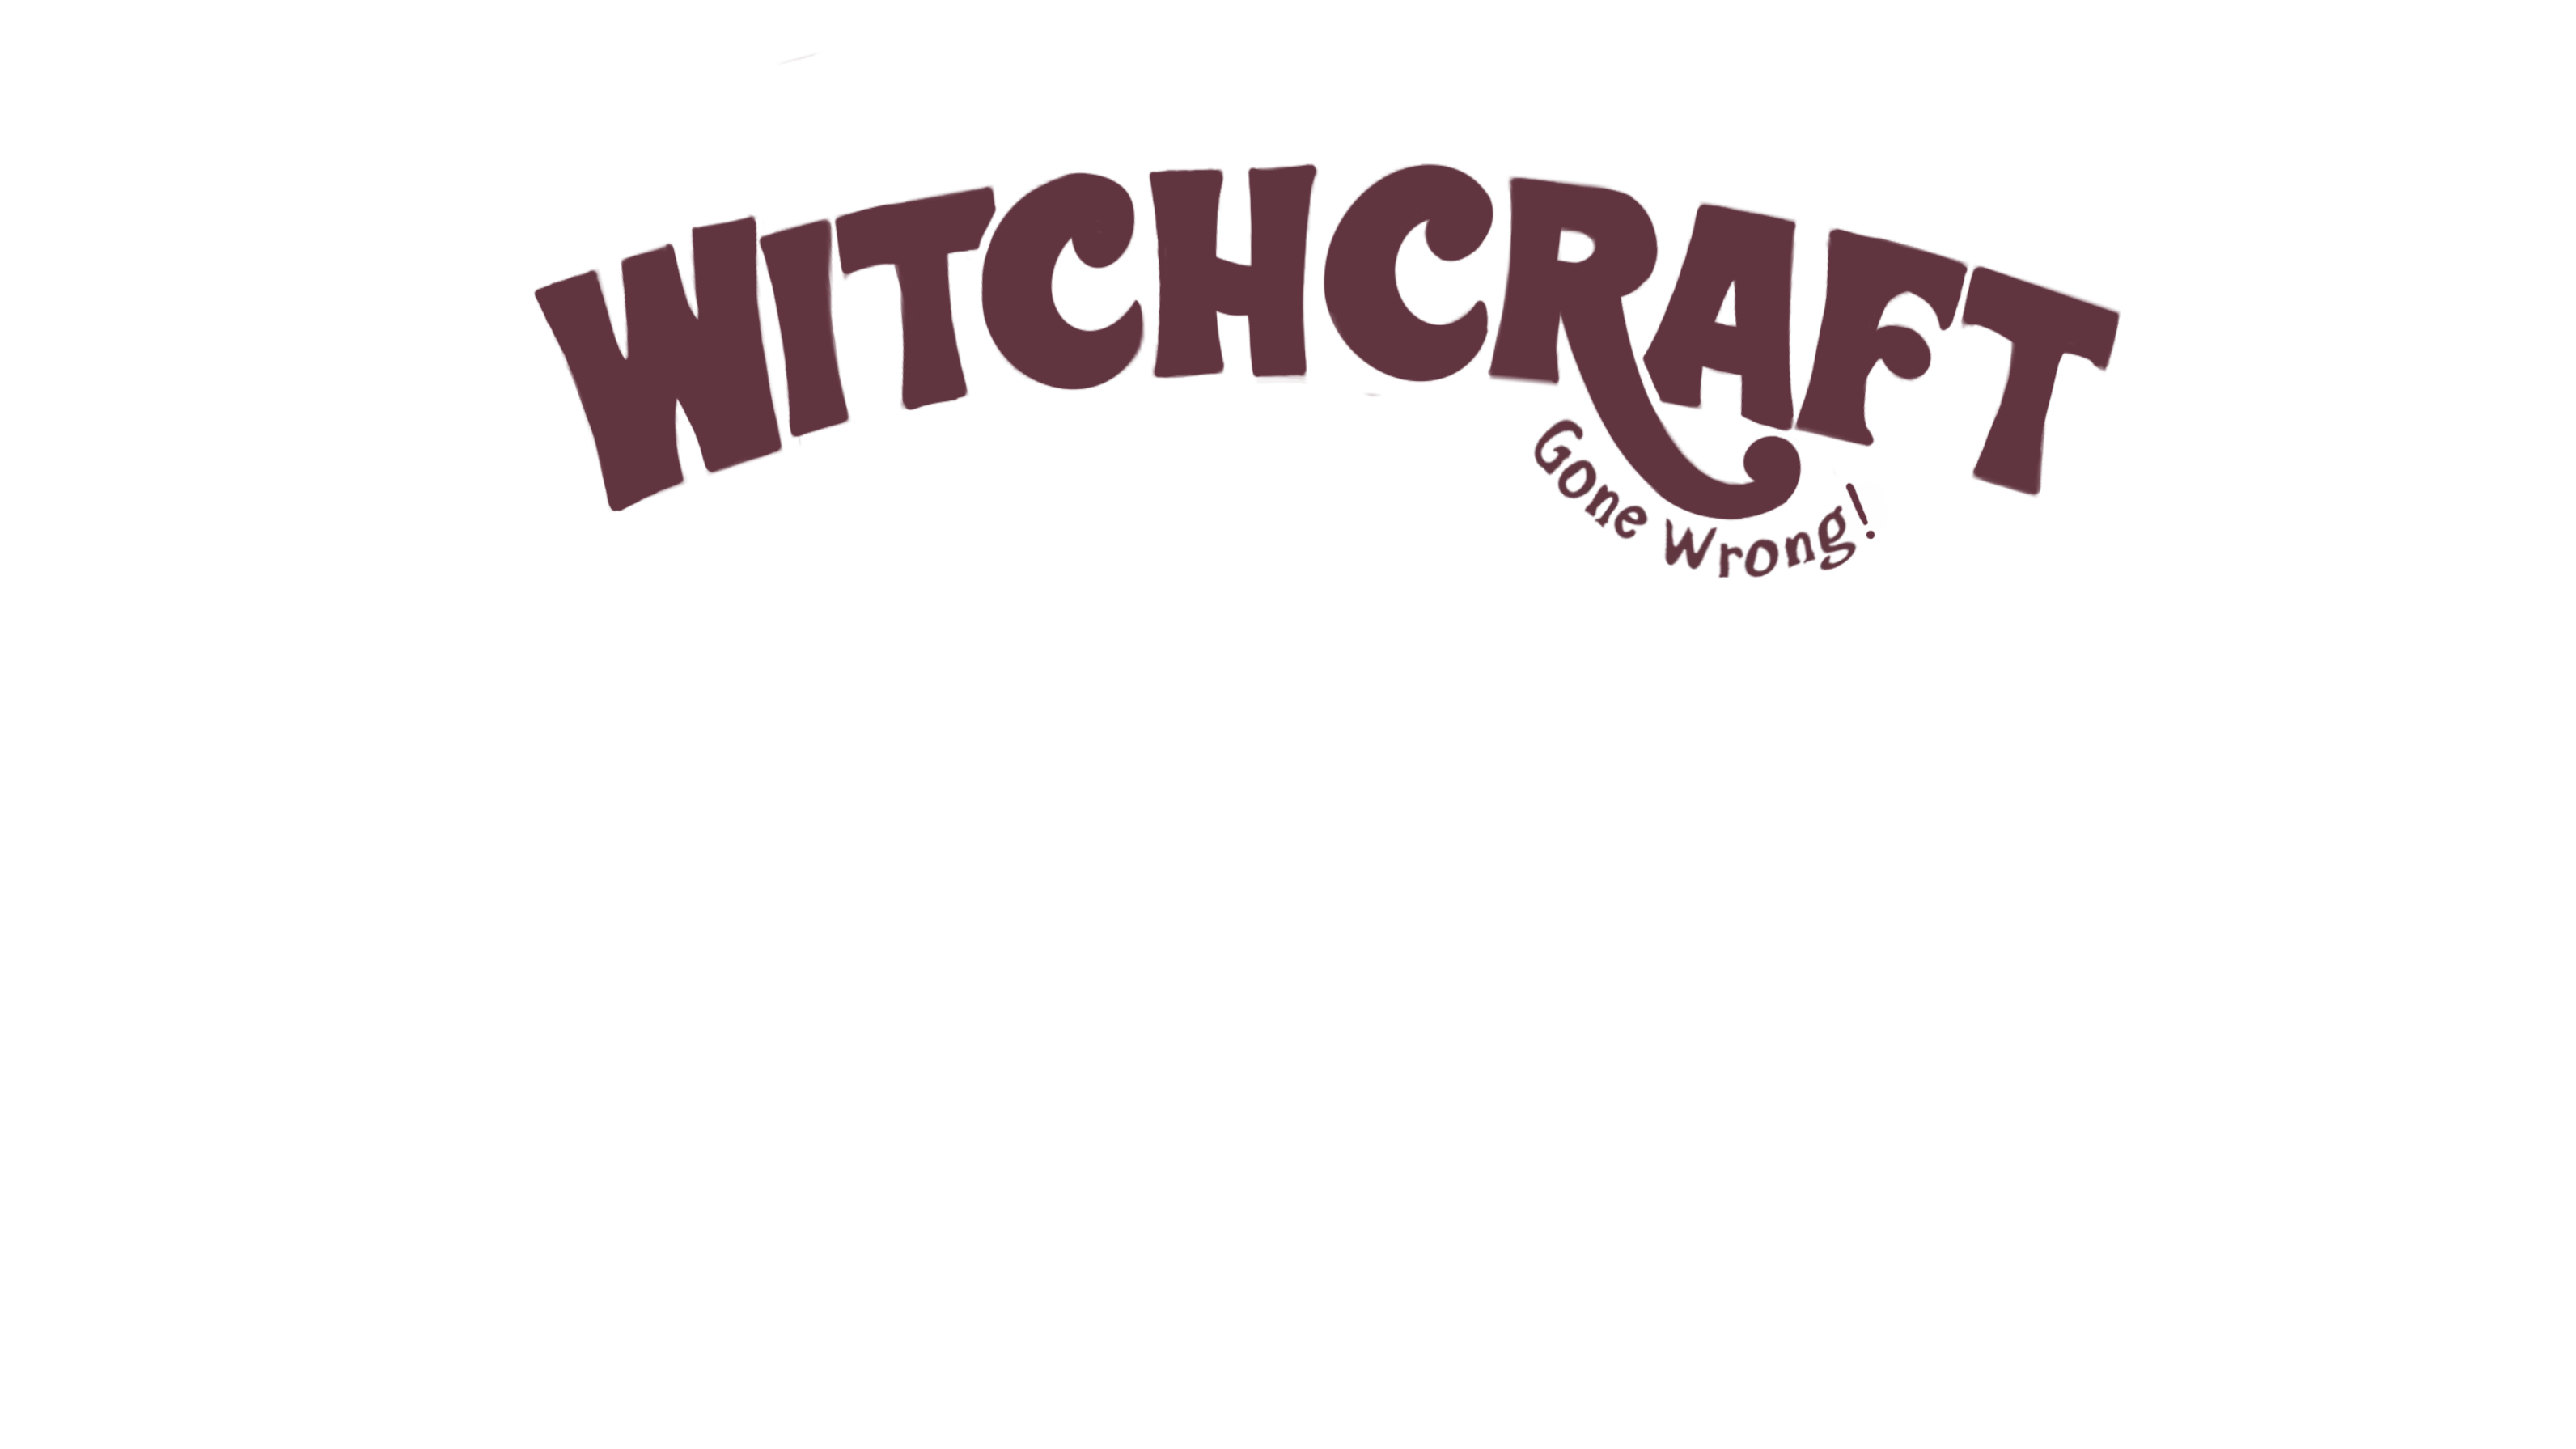 Witchcraft-goneWrong